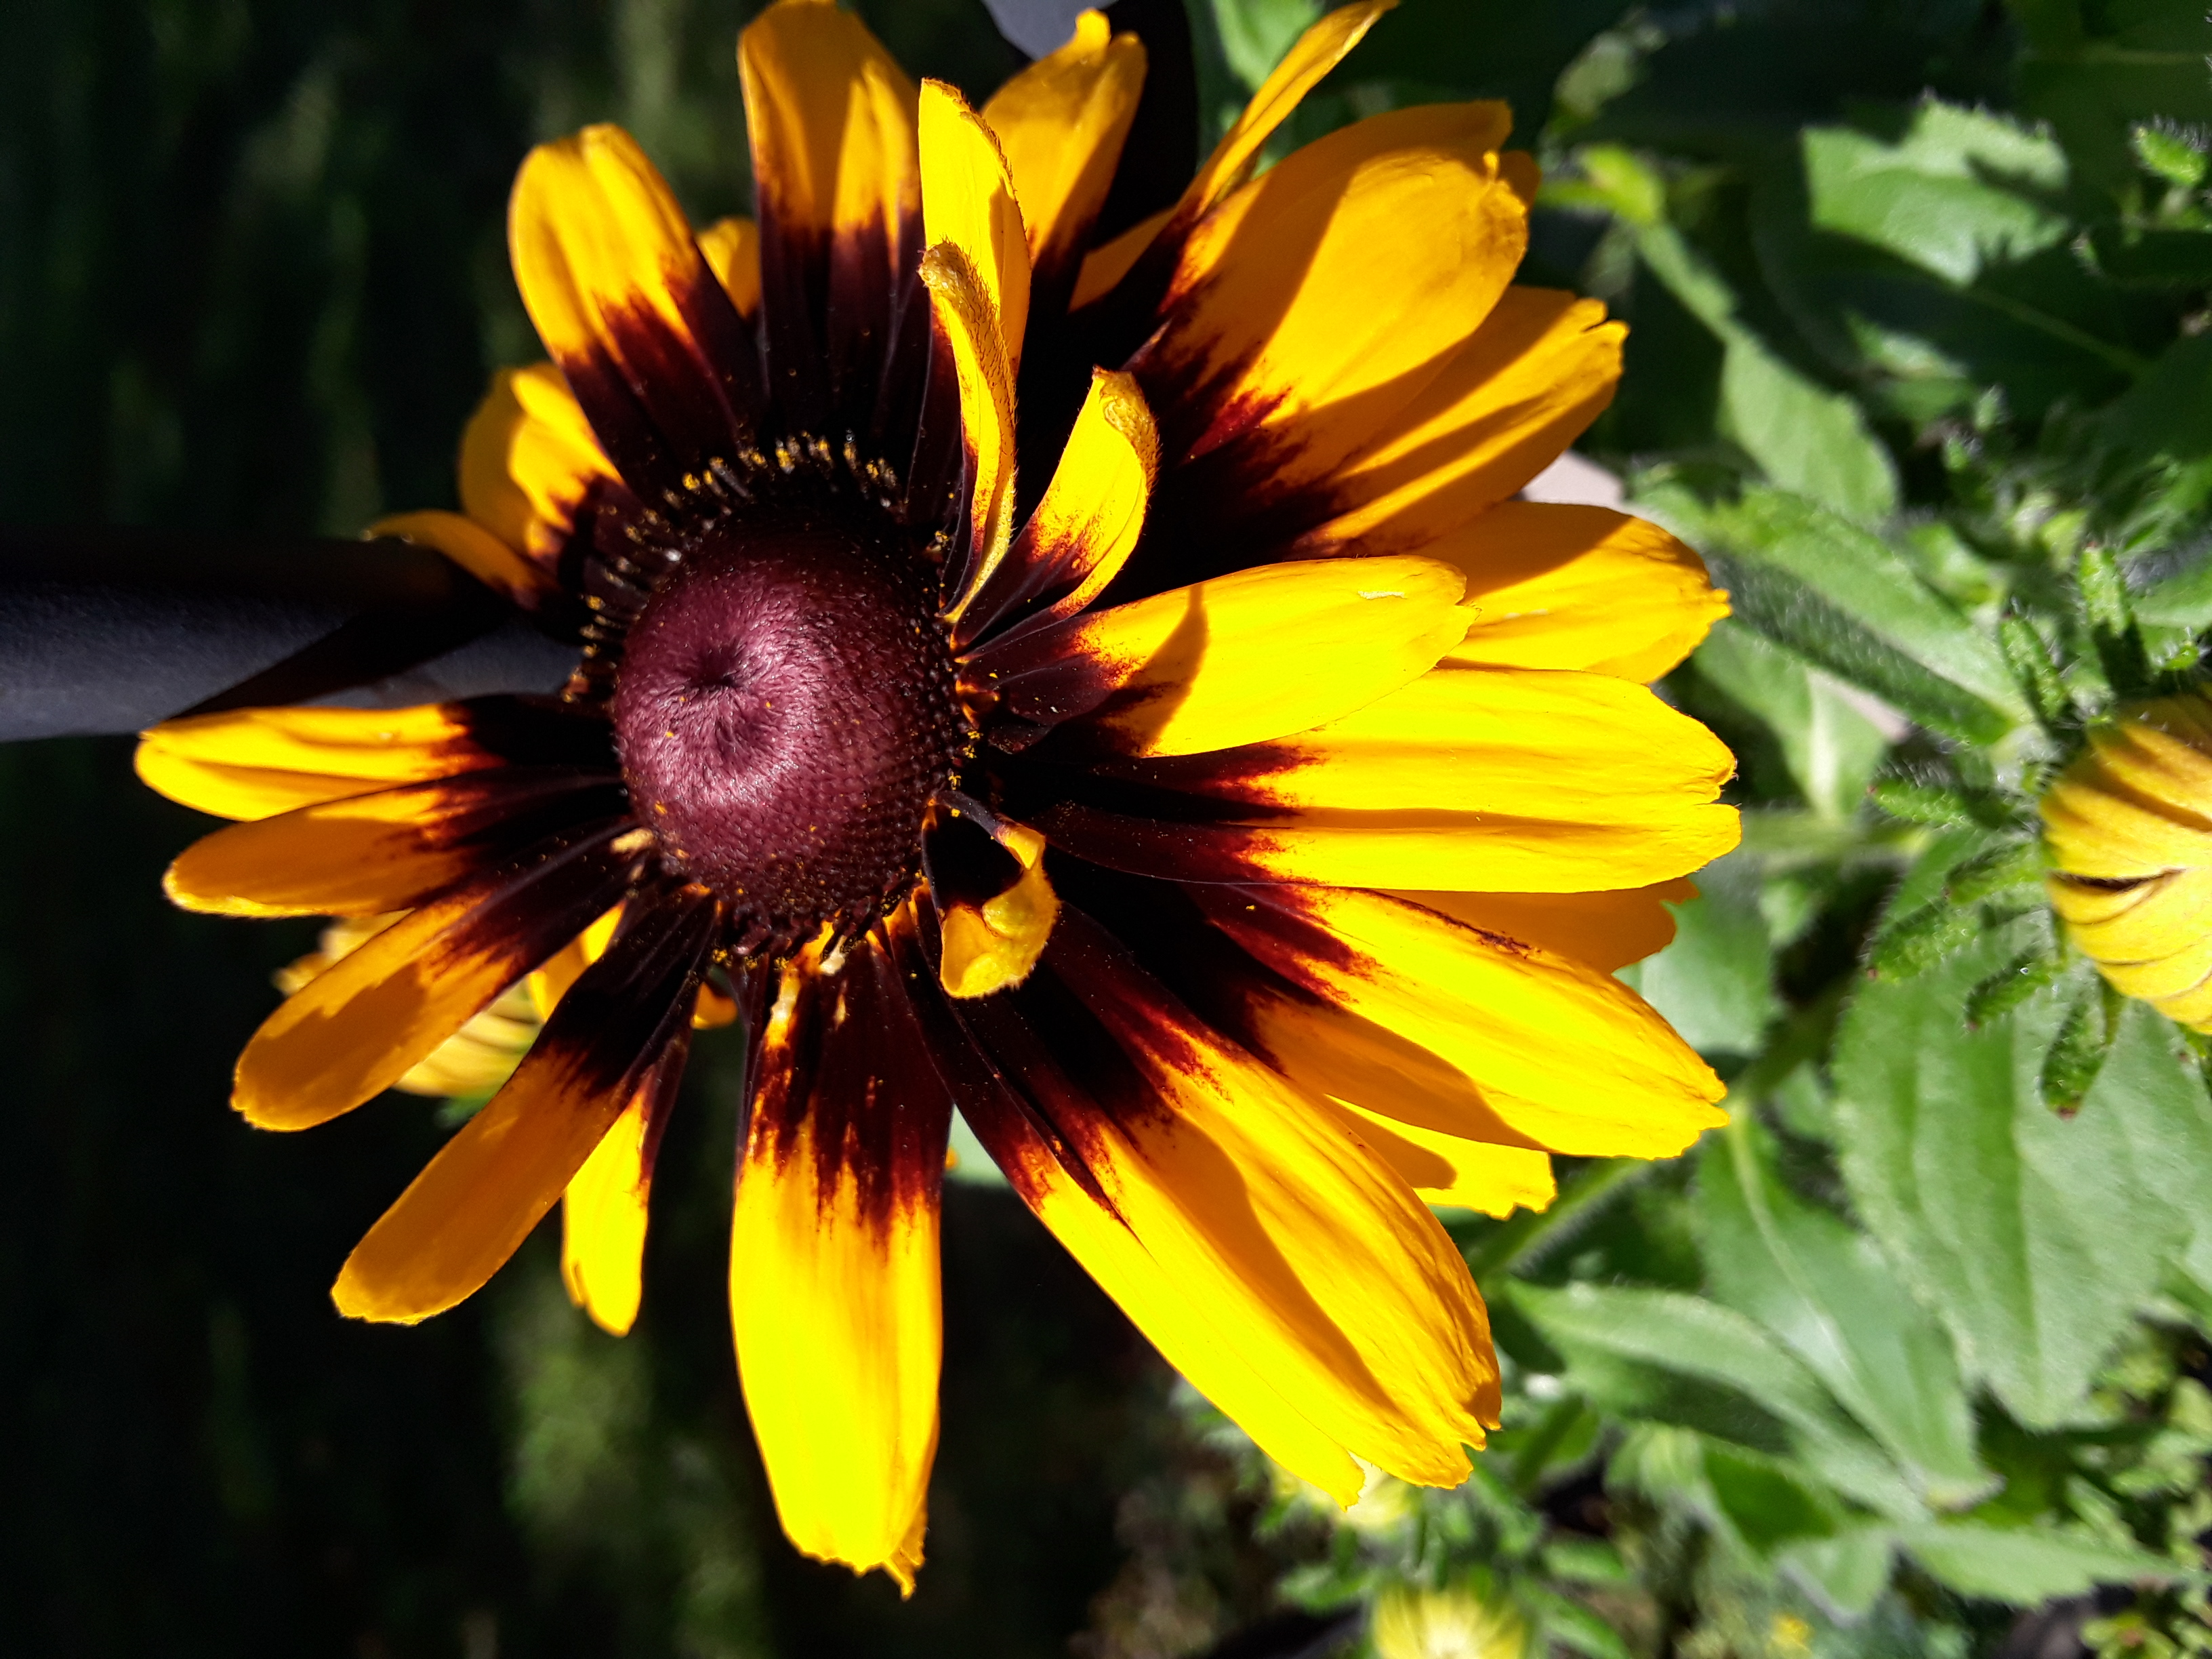 A large daisy flower in bright yellow gold with center markings of deep brown and purple.